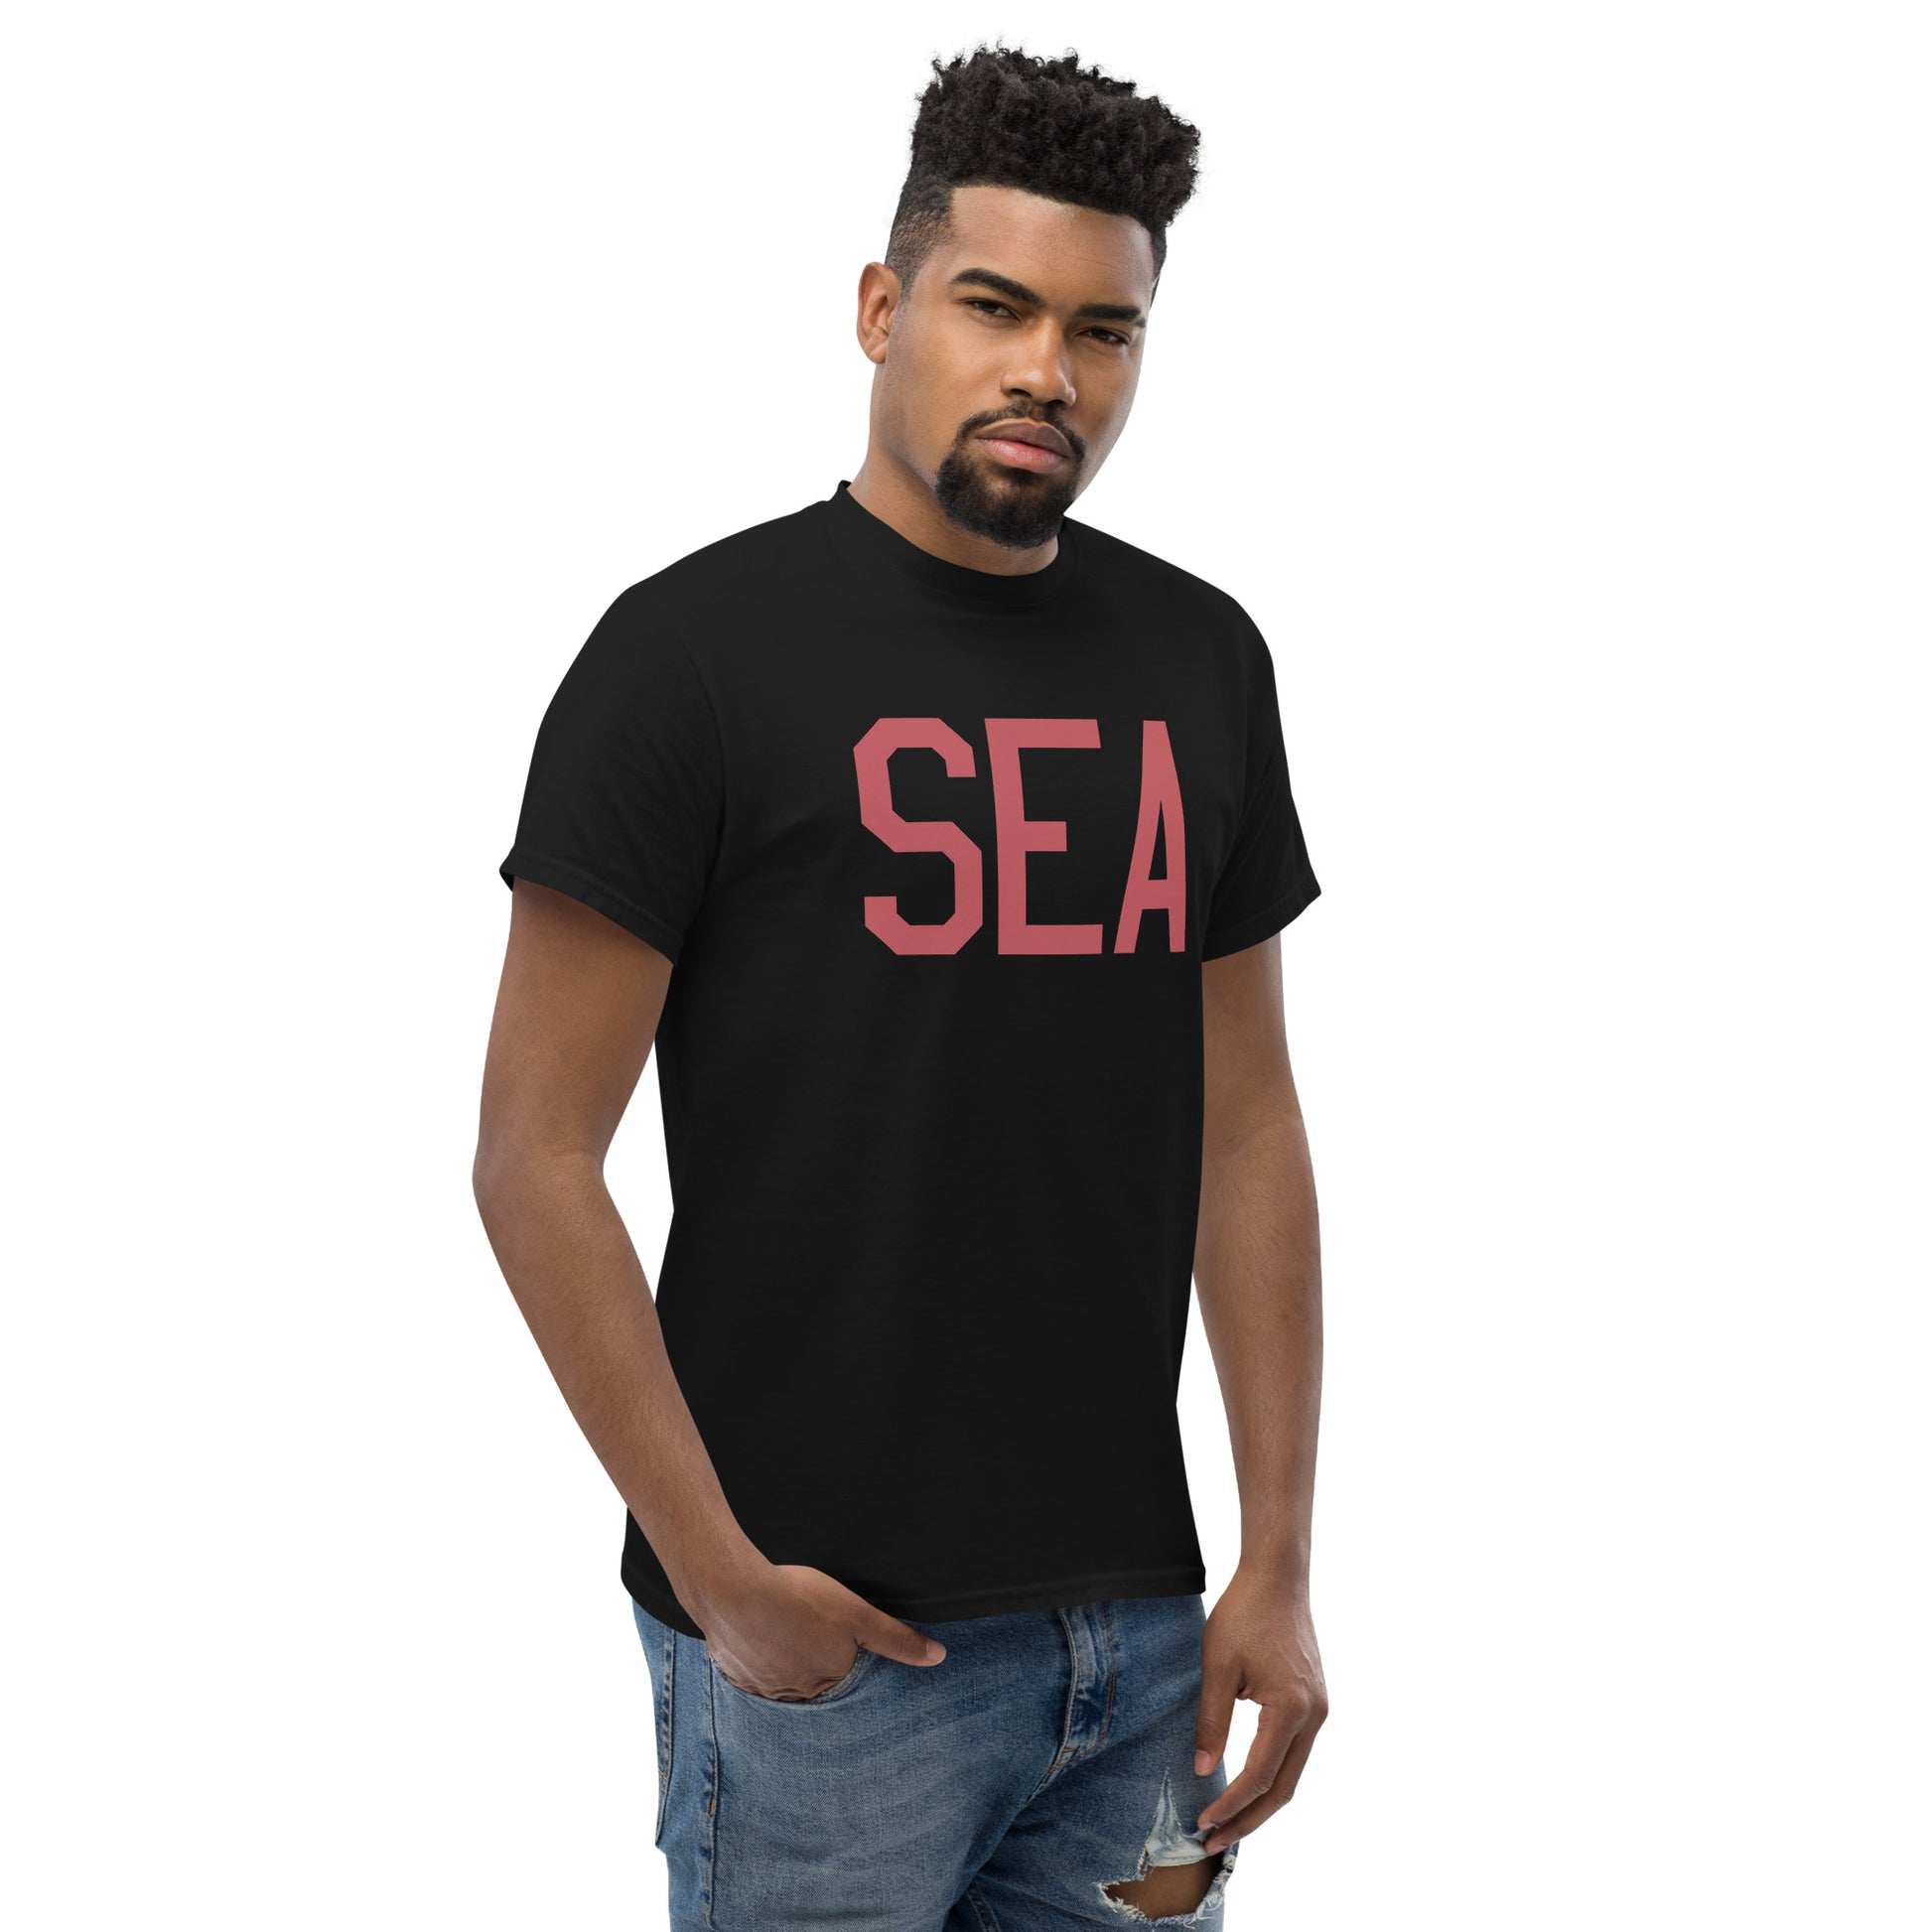 Aviation Enthusiast Men's Tee - Deep Pink Graphic • SEA Seattle • YHM Designs - Image 08